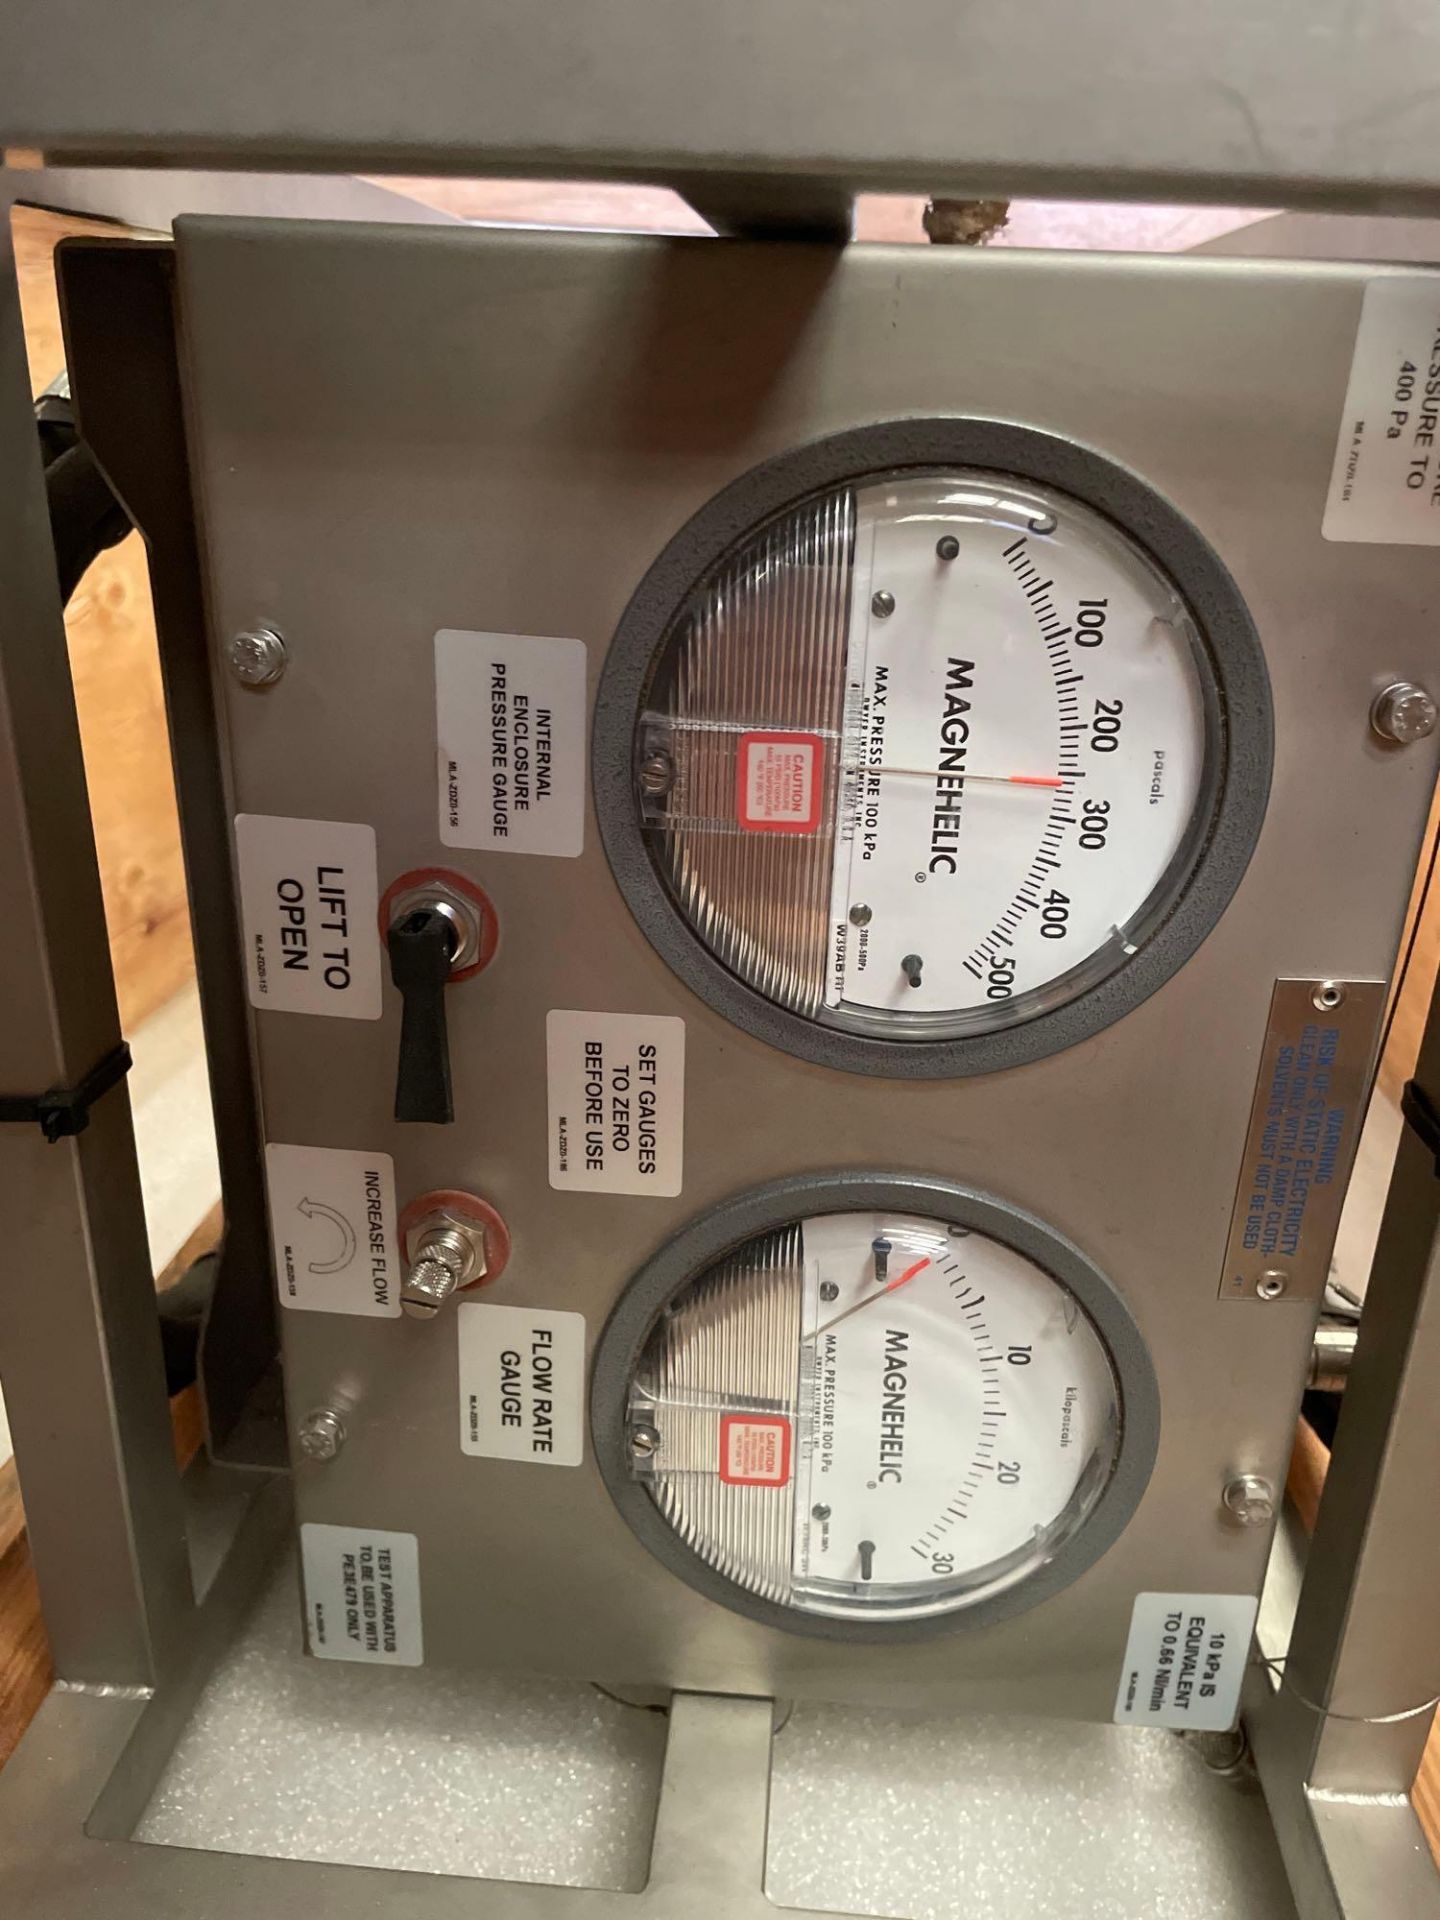 New Magnehelic Air Pressure Gauge, used to pressurize cabinets In box - Image 3 of 3